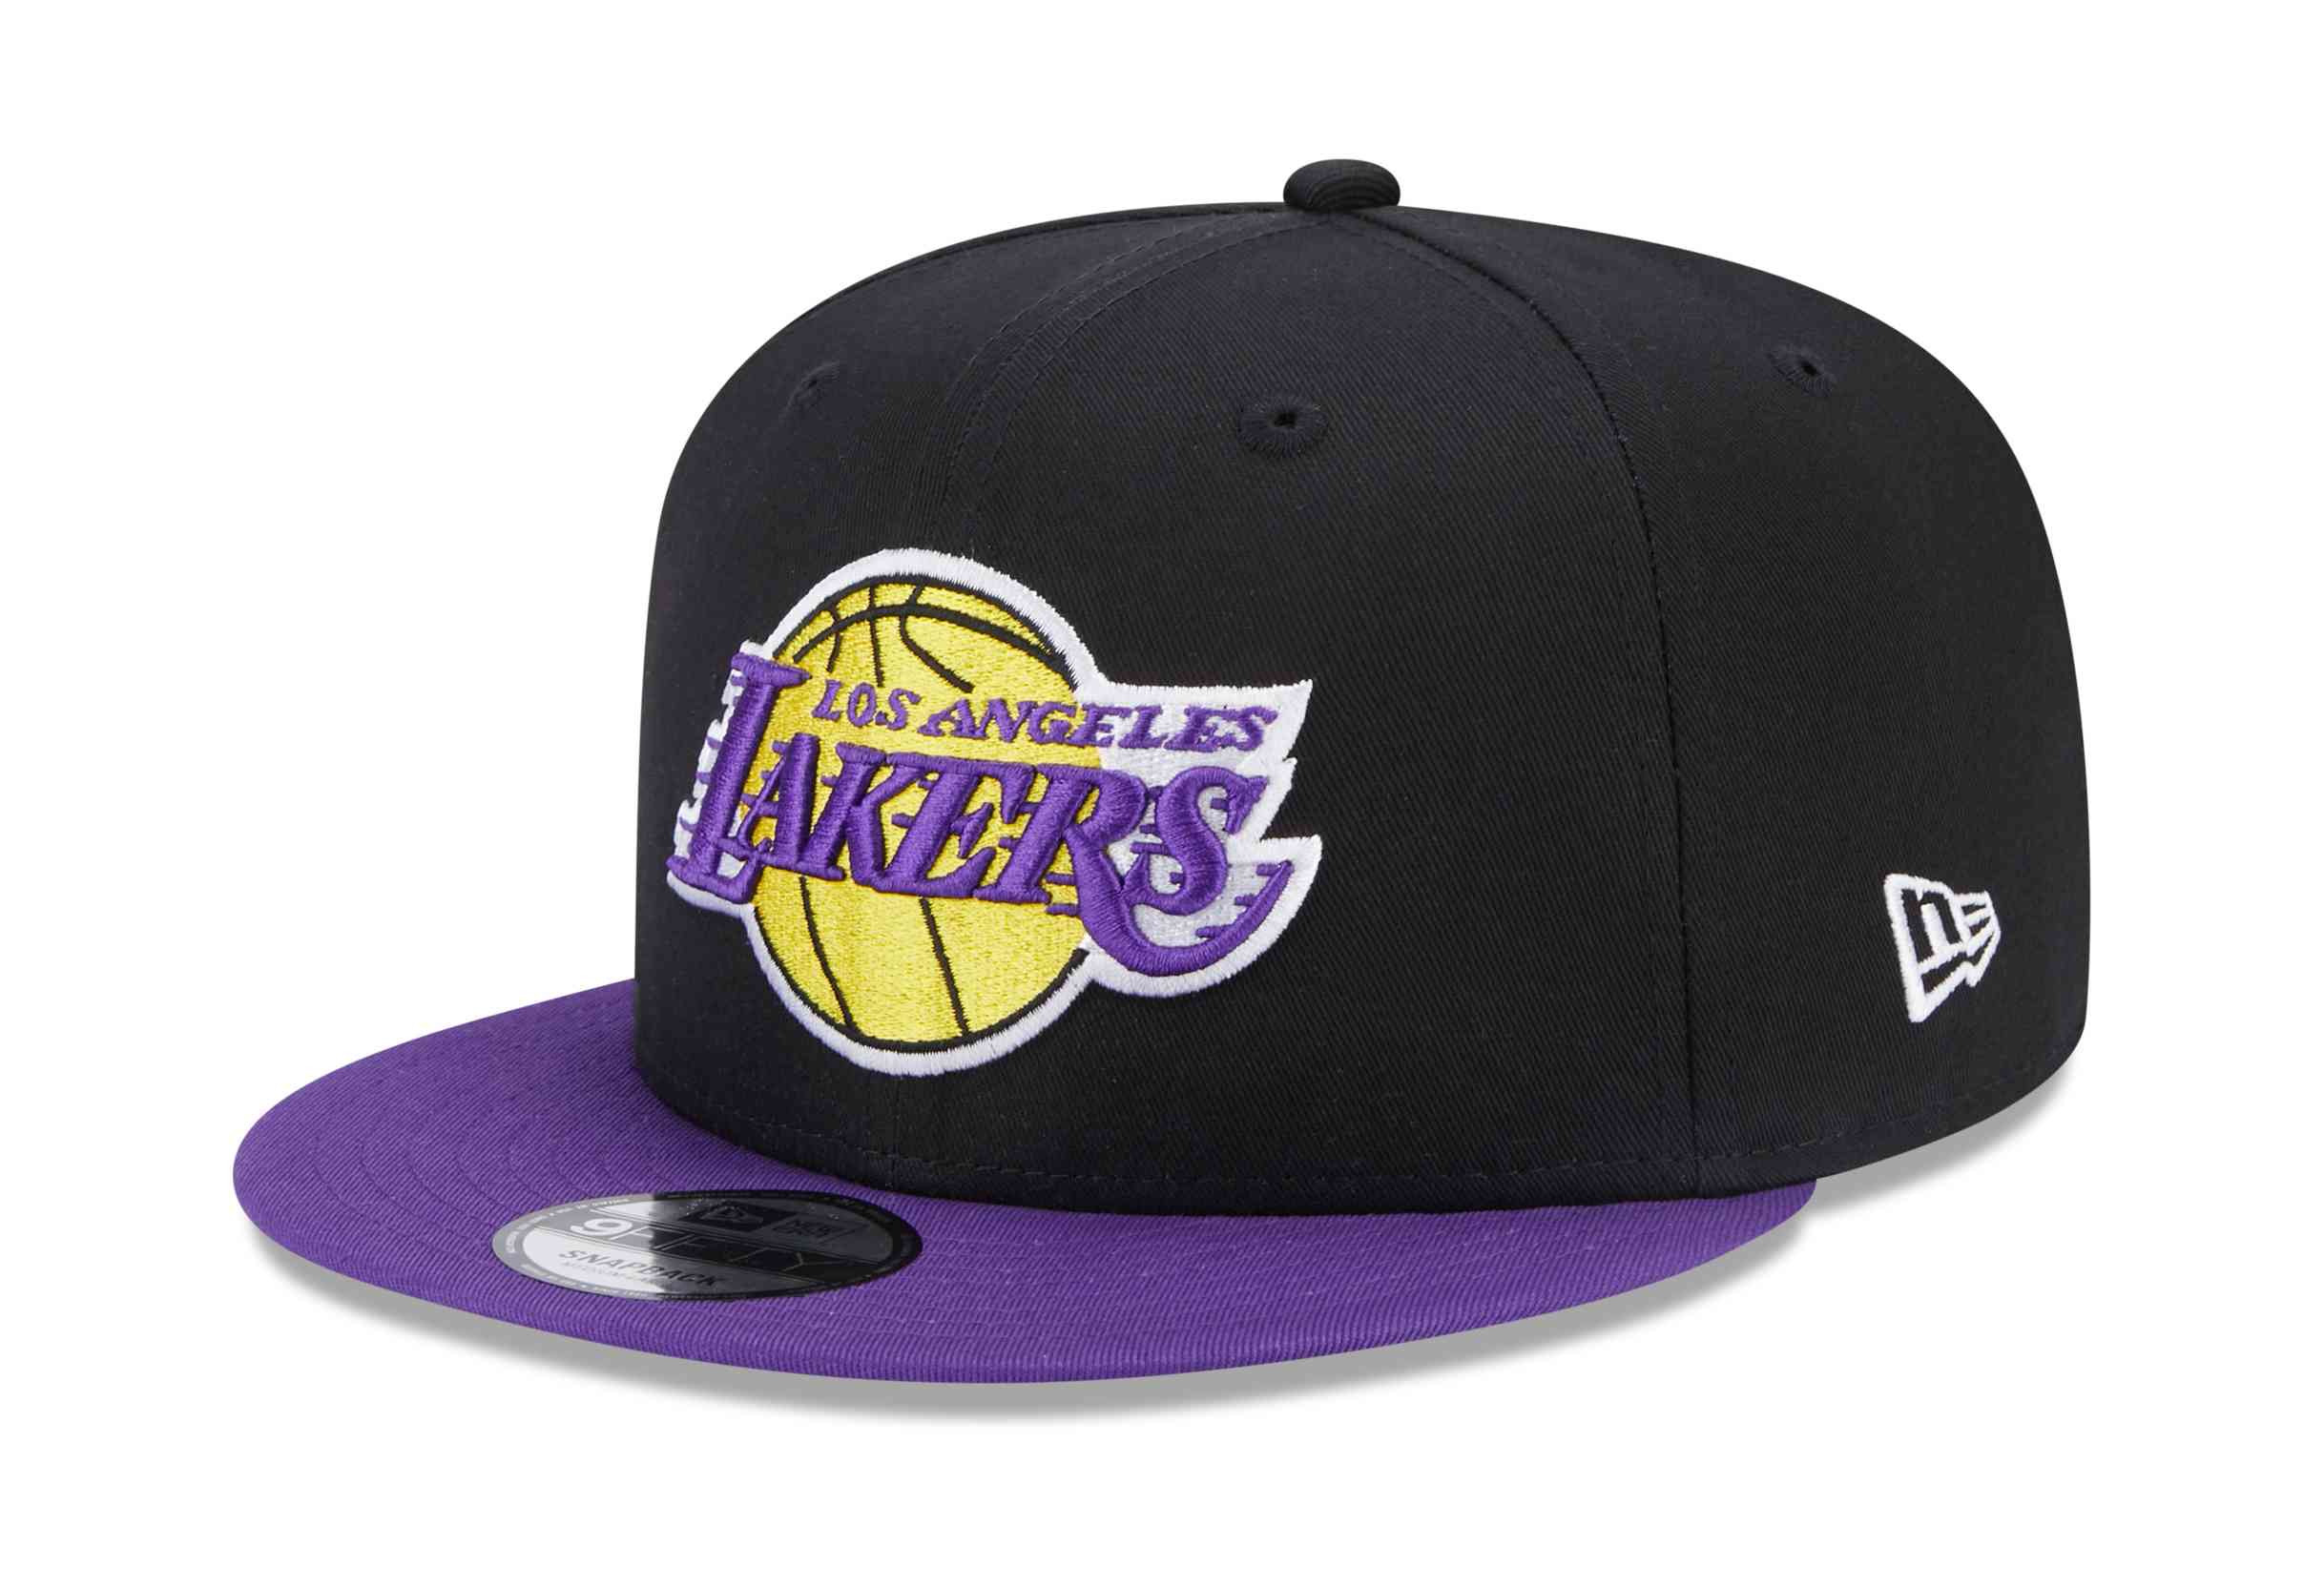 New Era - NBA Los Angeles Lakers Contrast Side Patch 9Fifty Snapback Cap